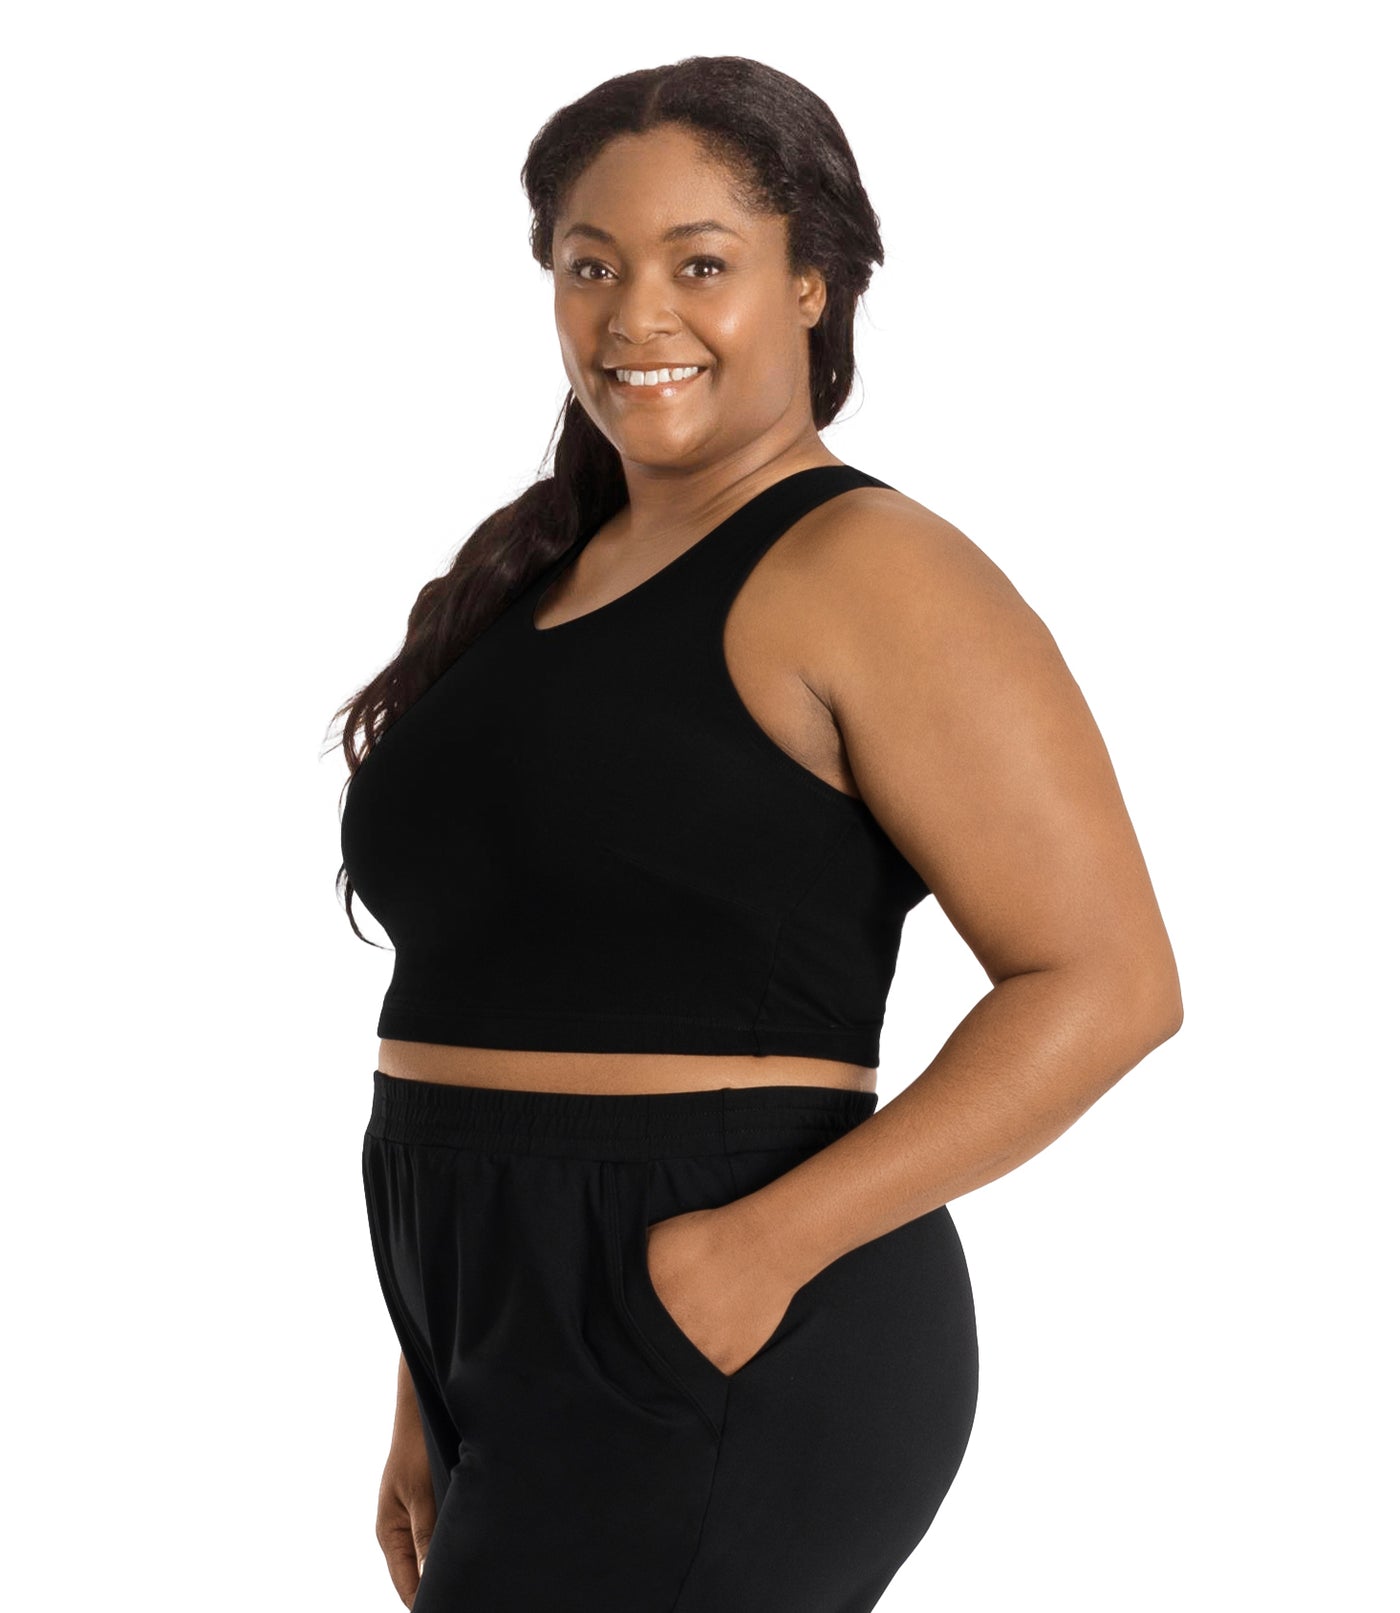  Plus size woman, facing right front side, wearing a black JunoActive Stretch naturals full fit plus size bra. Featuring a v-neck and side bust darts for a full fit. She is also wearing black JunoActive plus size pants.